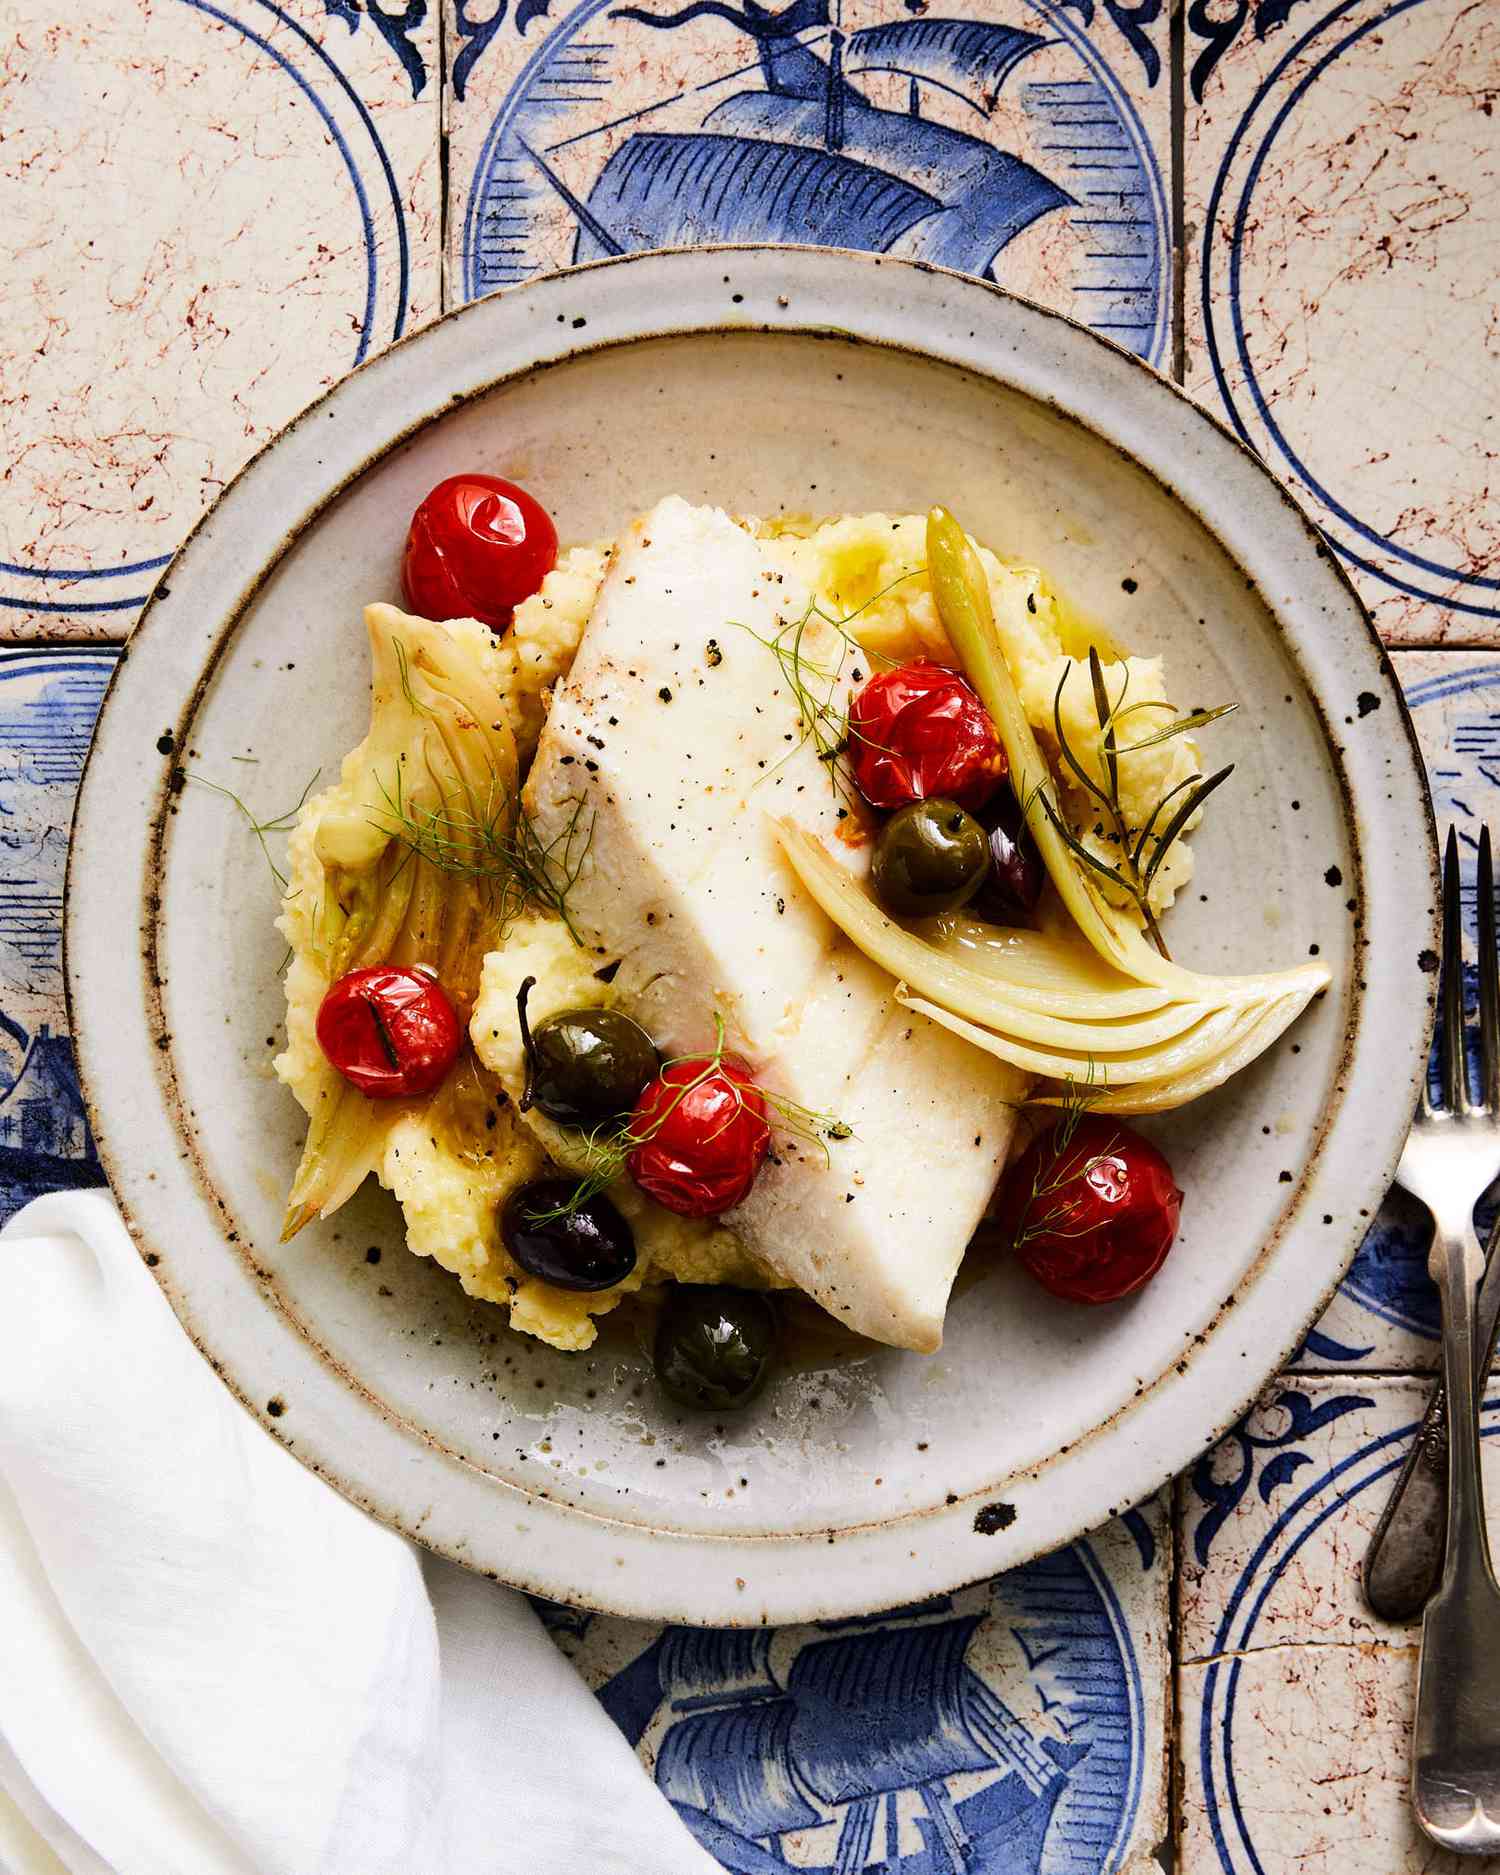 Oil-Poached Halibut with Fennel, Tomatoes, and Olives with mashed potatoes